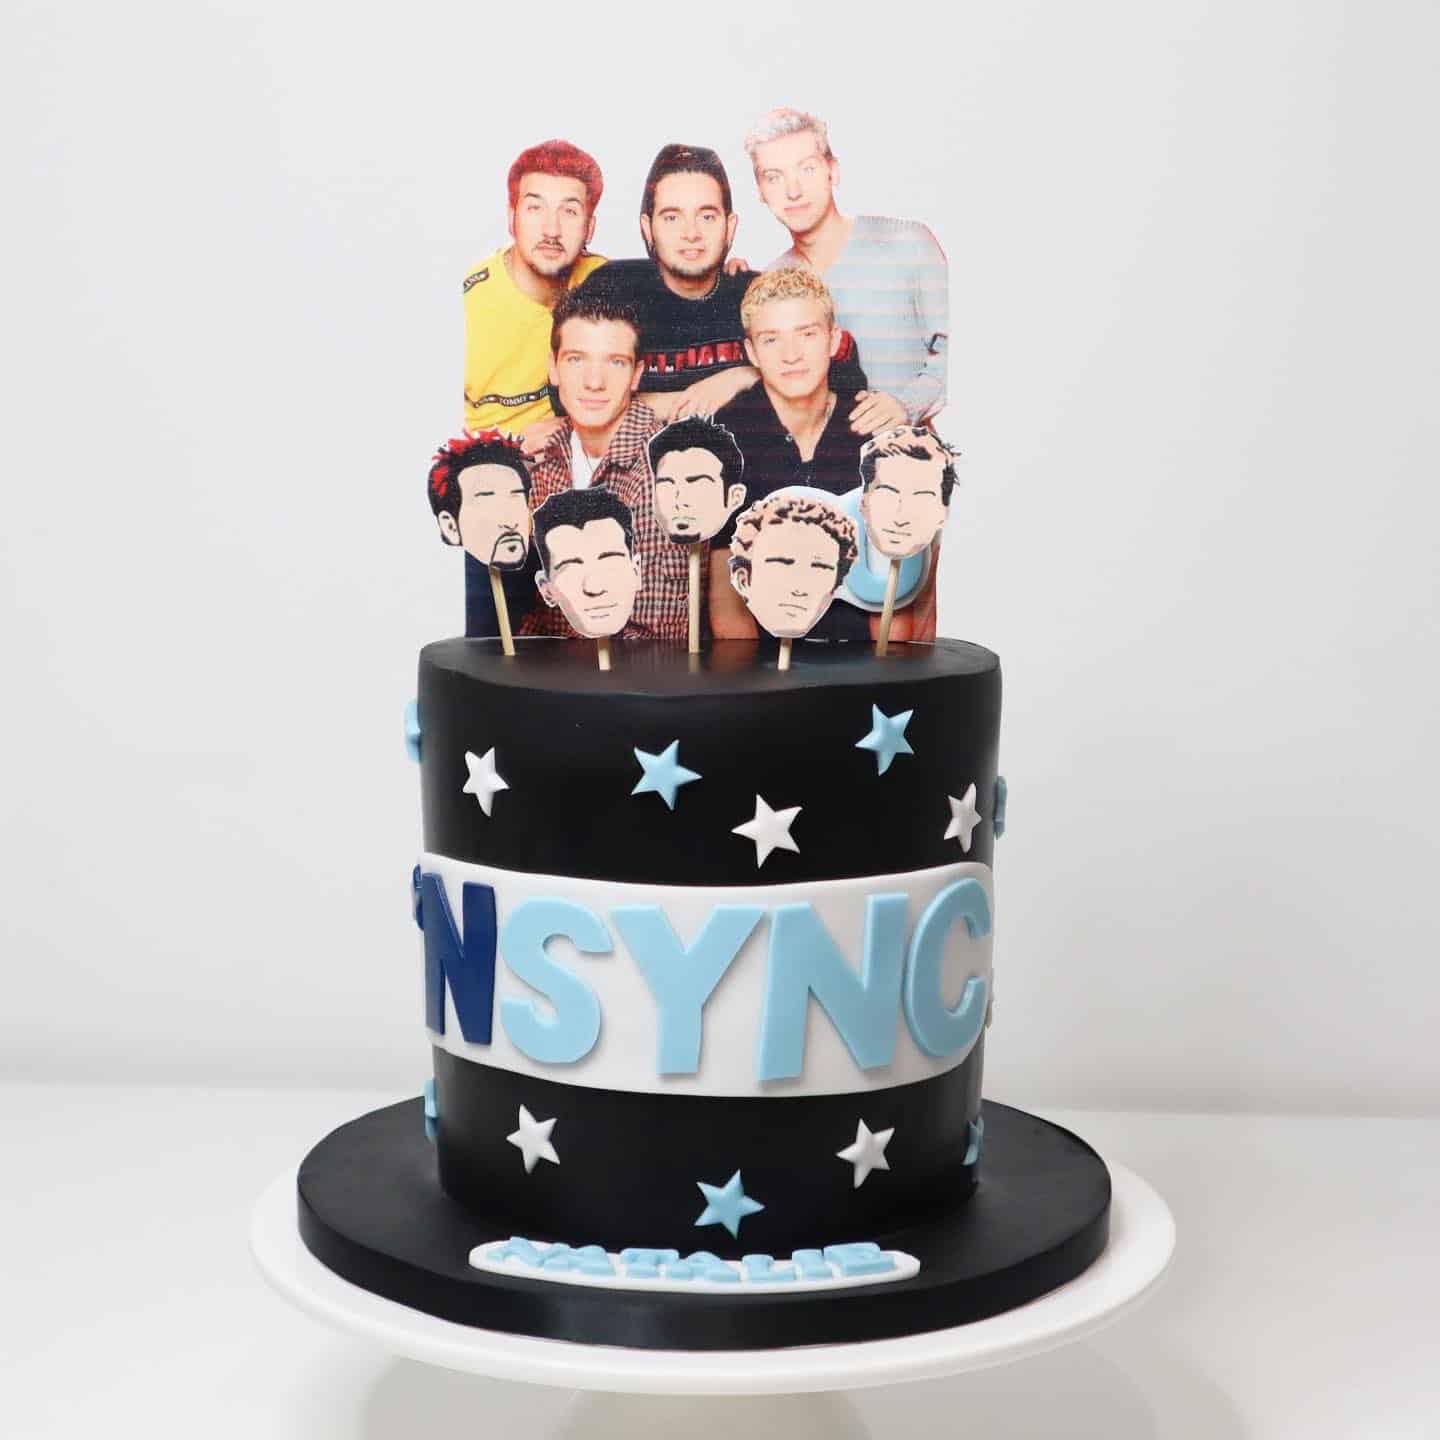 A professionally baked 90s cake of Nsync